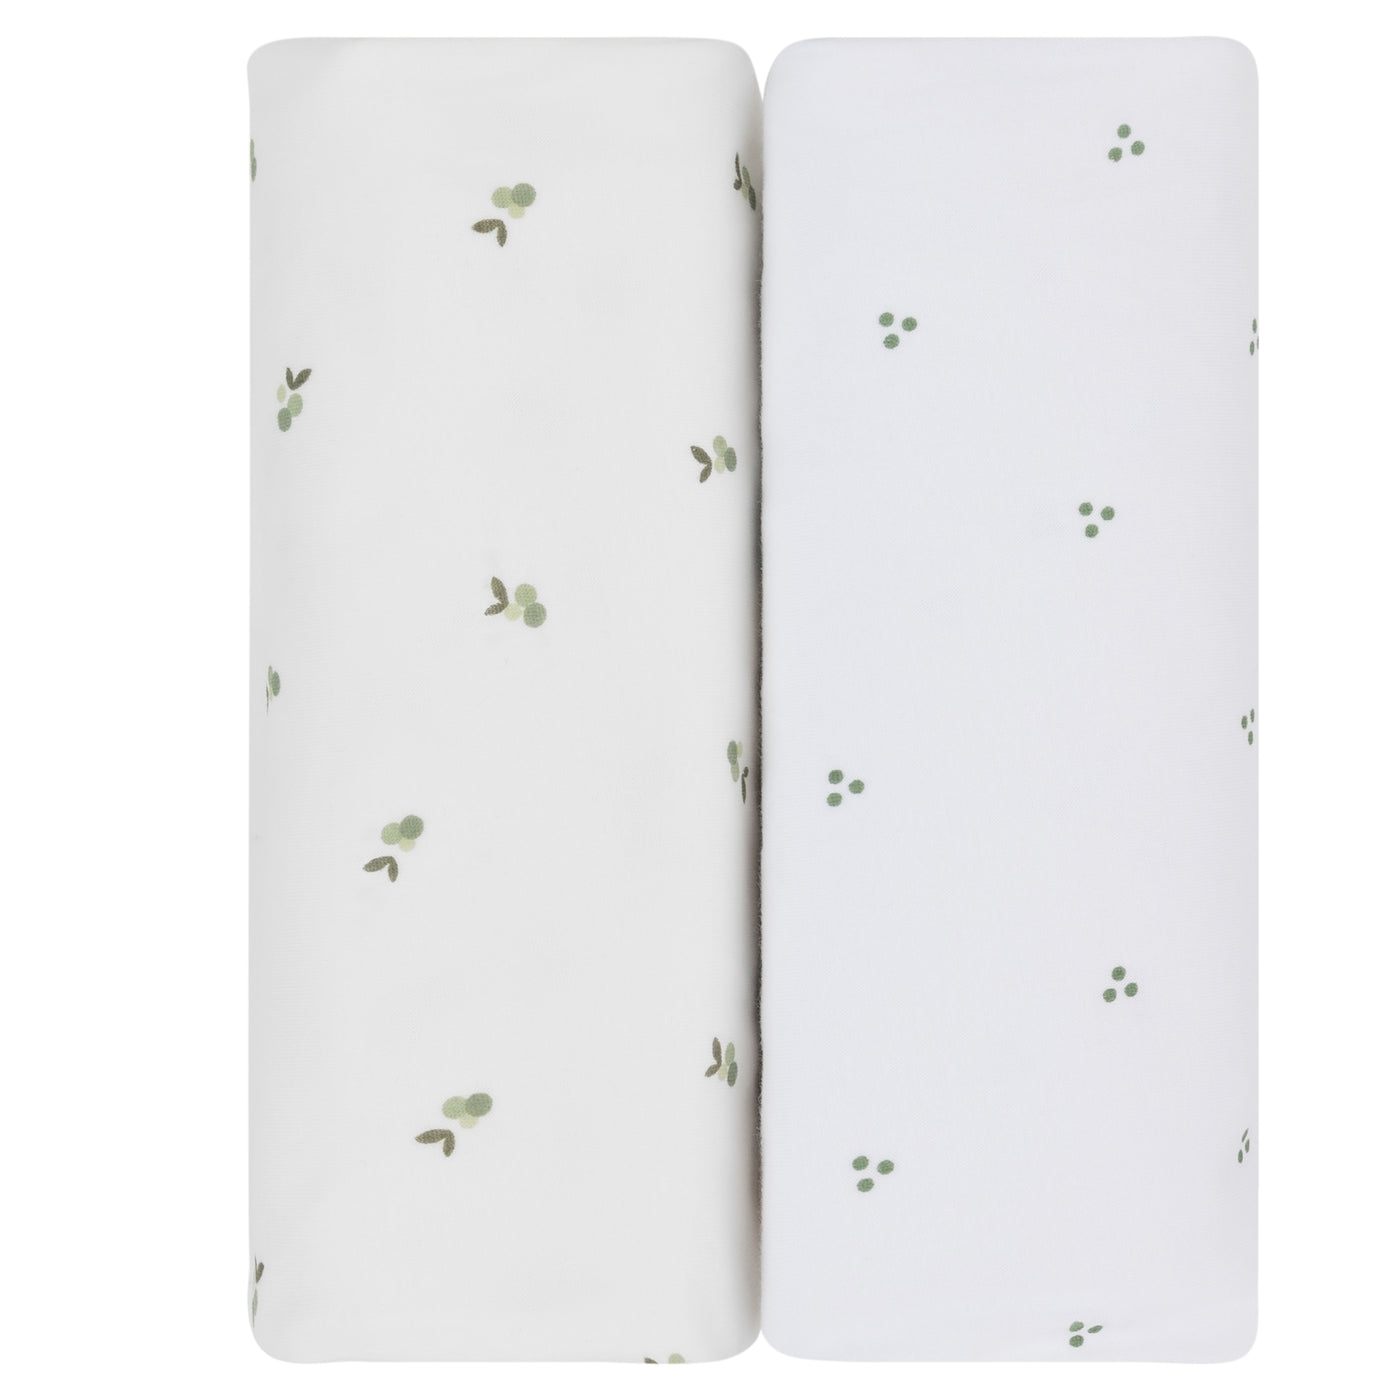 Ely's & Co. Waterproof Two Pack Portable Crib / Pack N Play Sheets - Sage Berry Collection